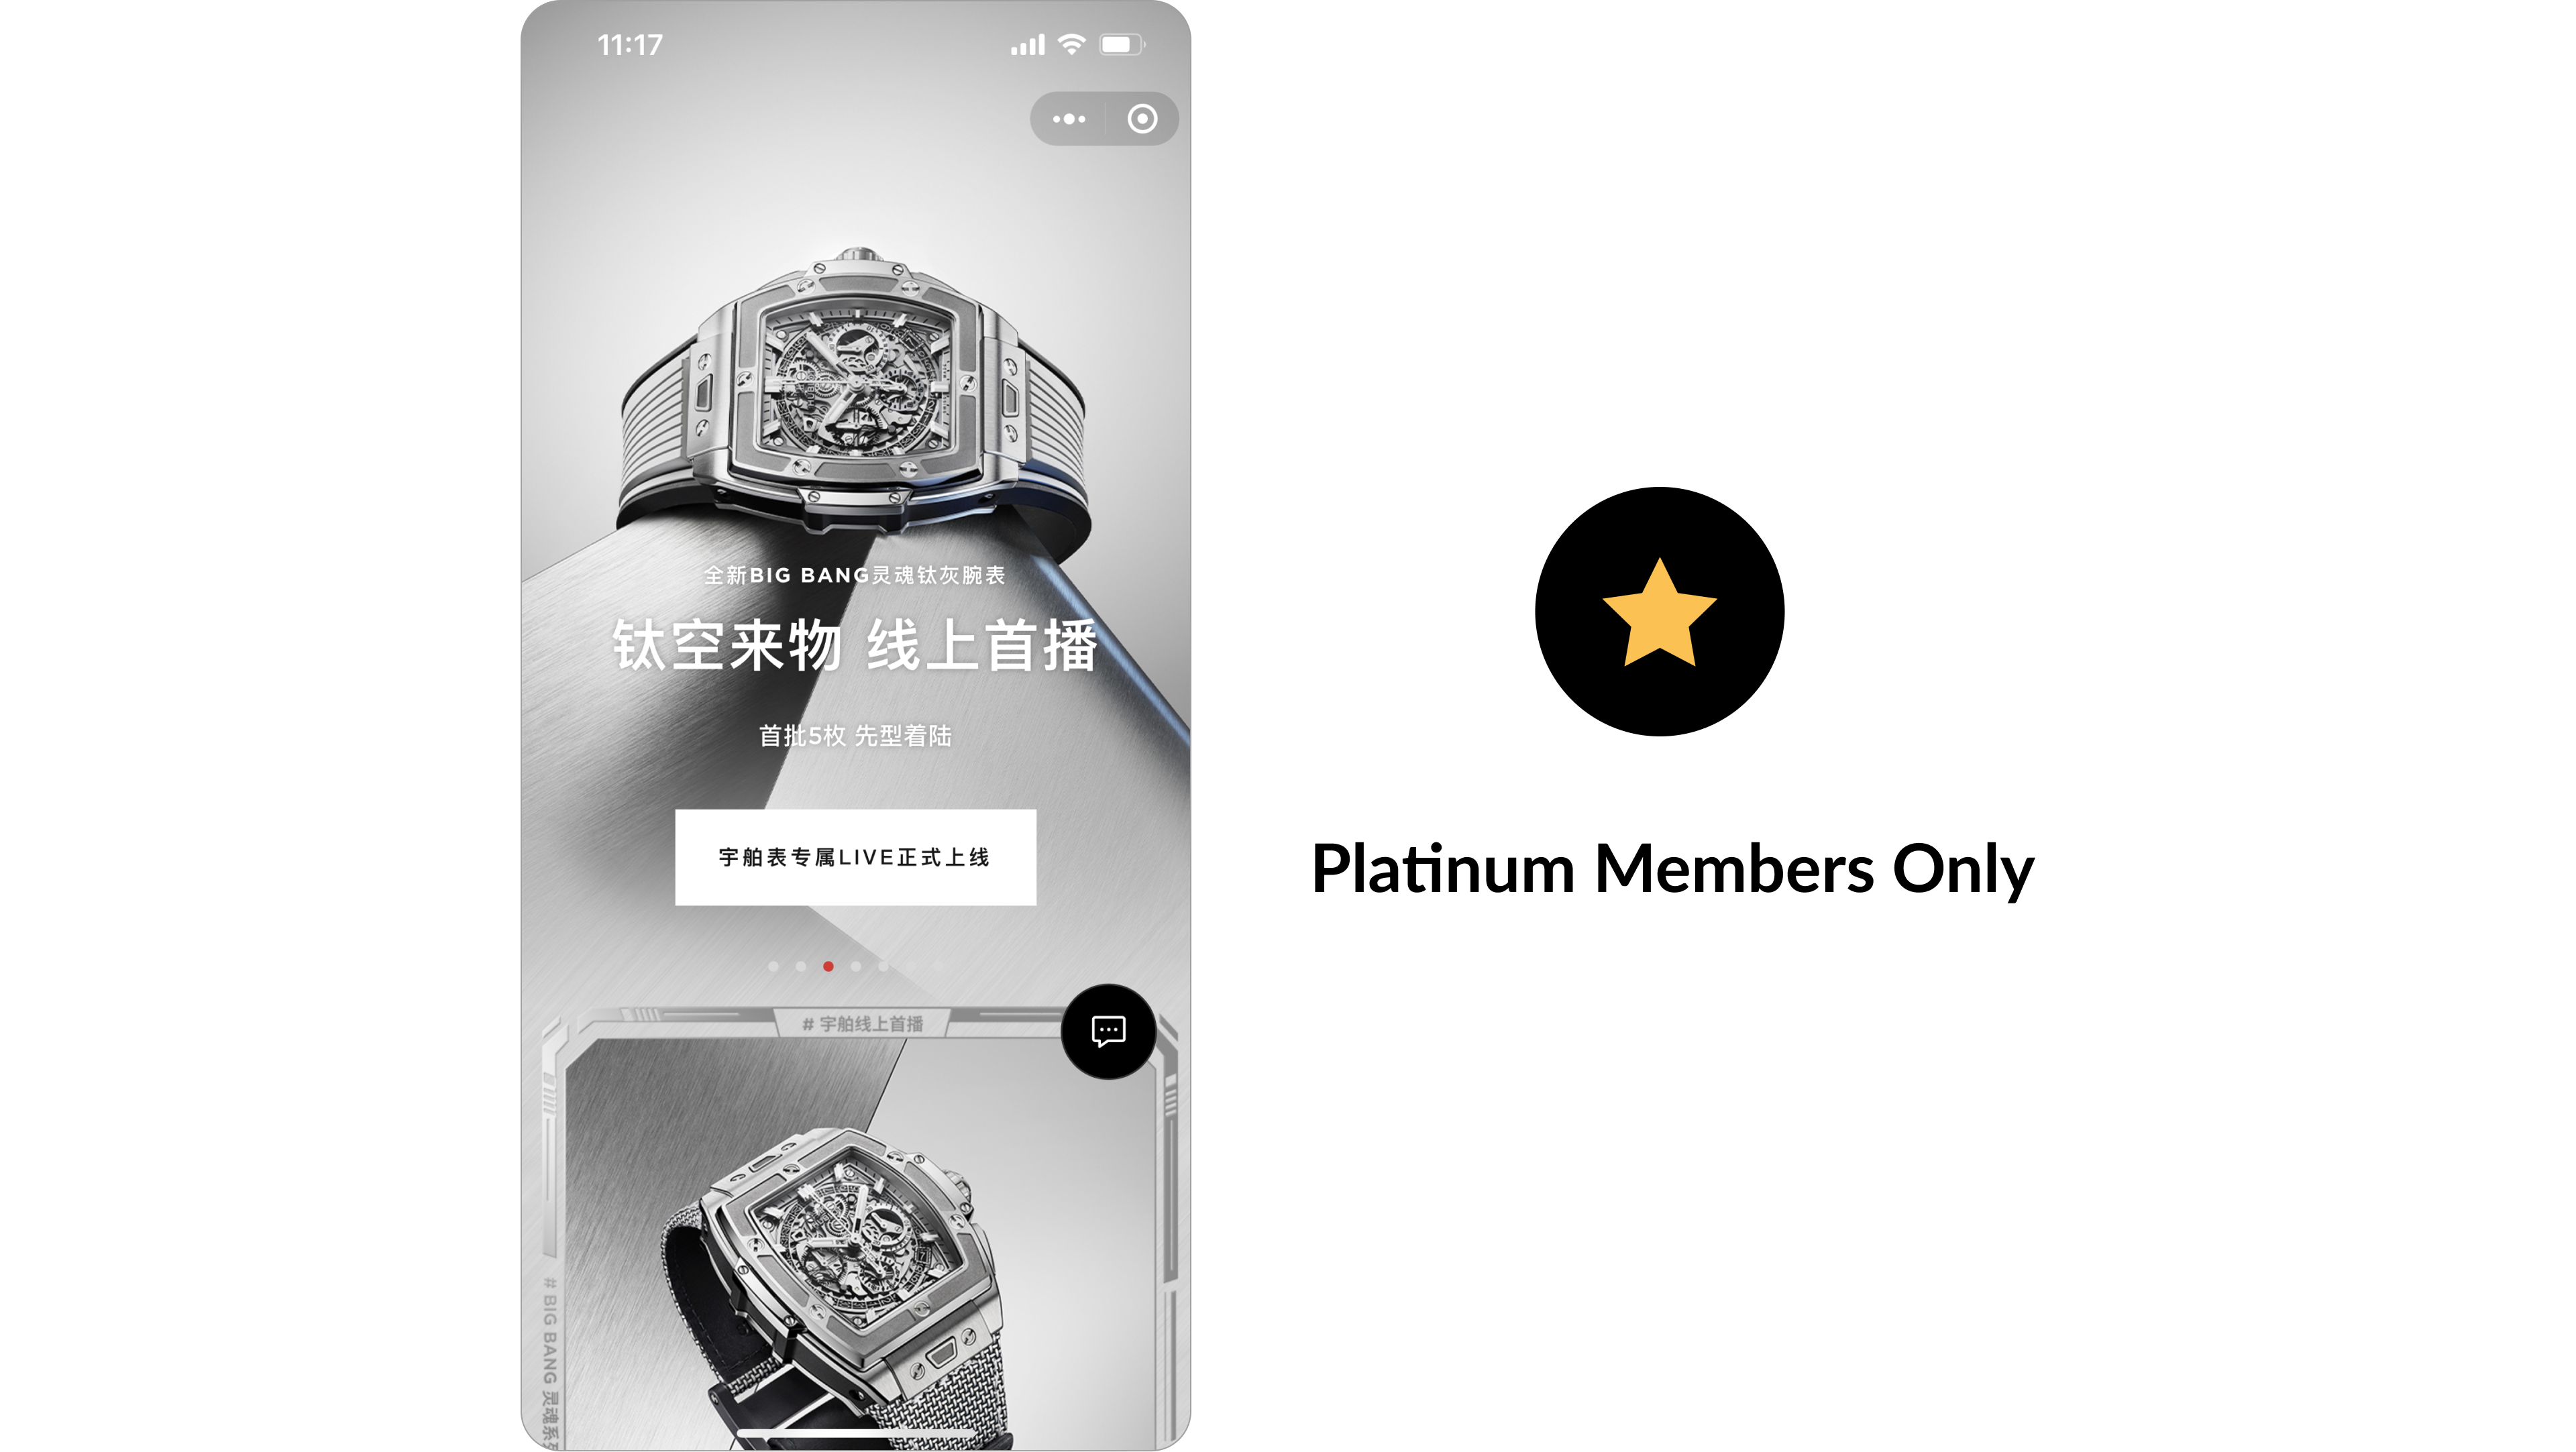 Only Platinum Members could access the Hublot WeChat Mini Program